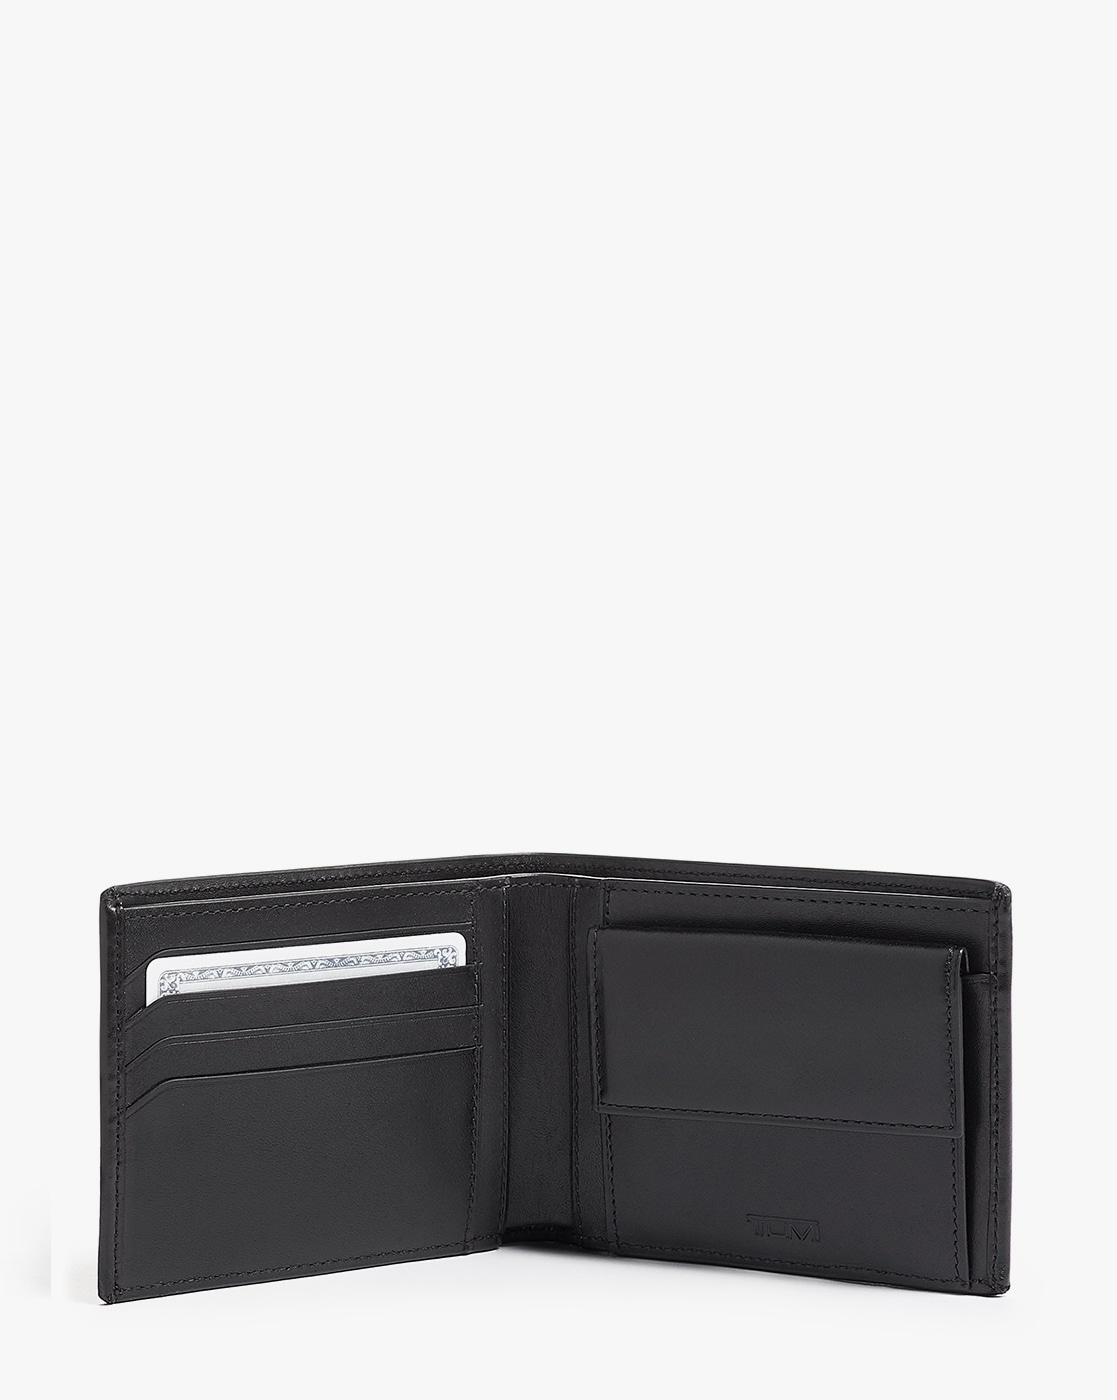 Neiman Marcus Leather Printed Coin Pouch - Black Wallets